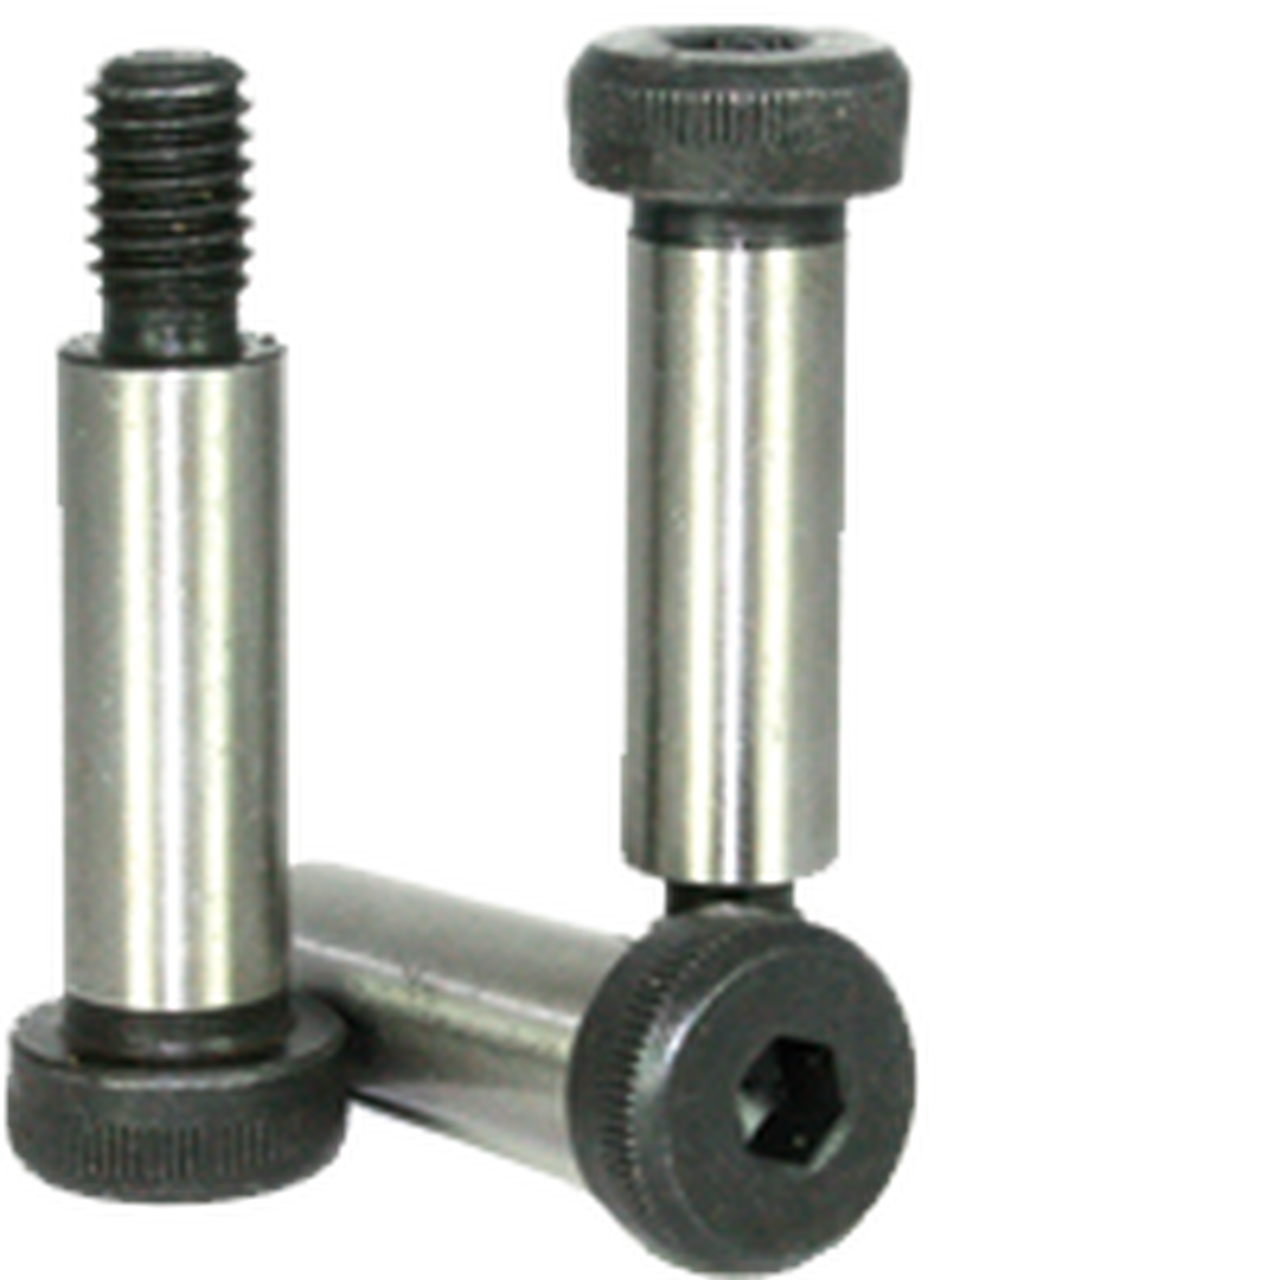 The Nuts and Shoulder Bolts of Fasteners